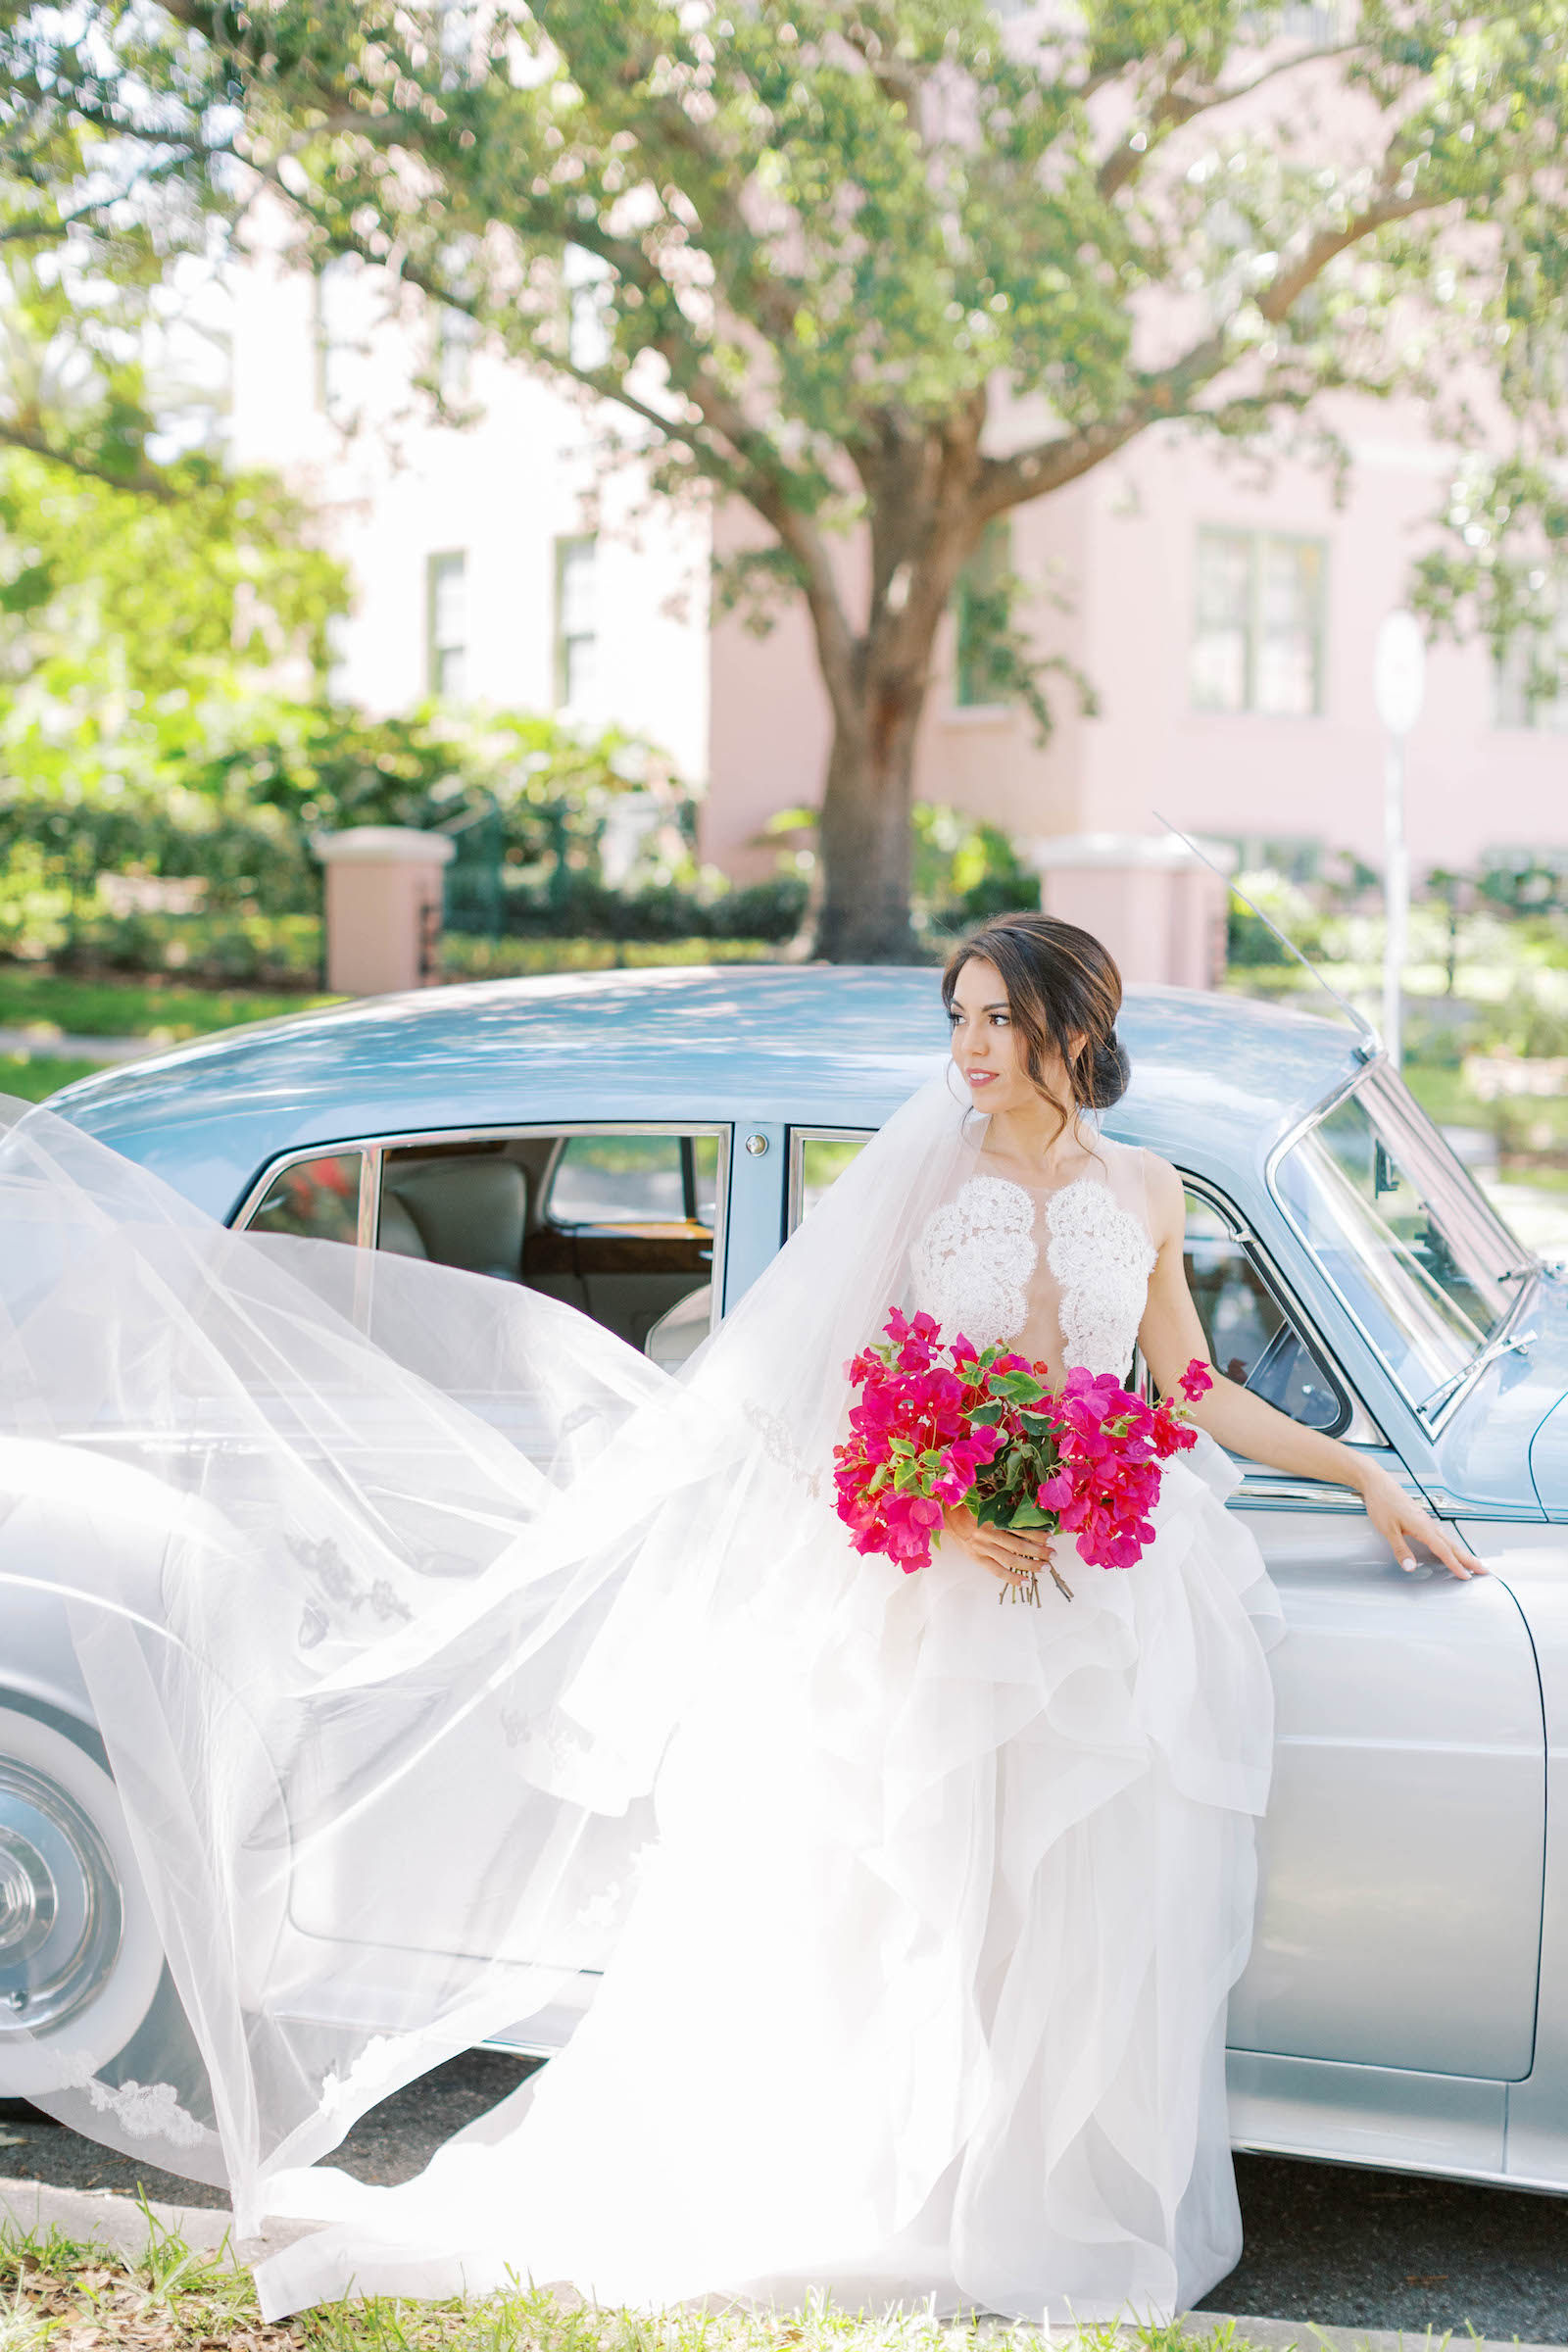 Bride in Front of a Vintage Car in Cutout Illusion Lace Ballgown with Ruffle Skirt and Hot Pink Floral Bouquet Wedding Portrait | St. Petersburg Wedding Venue Vinoy Renaissance